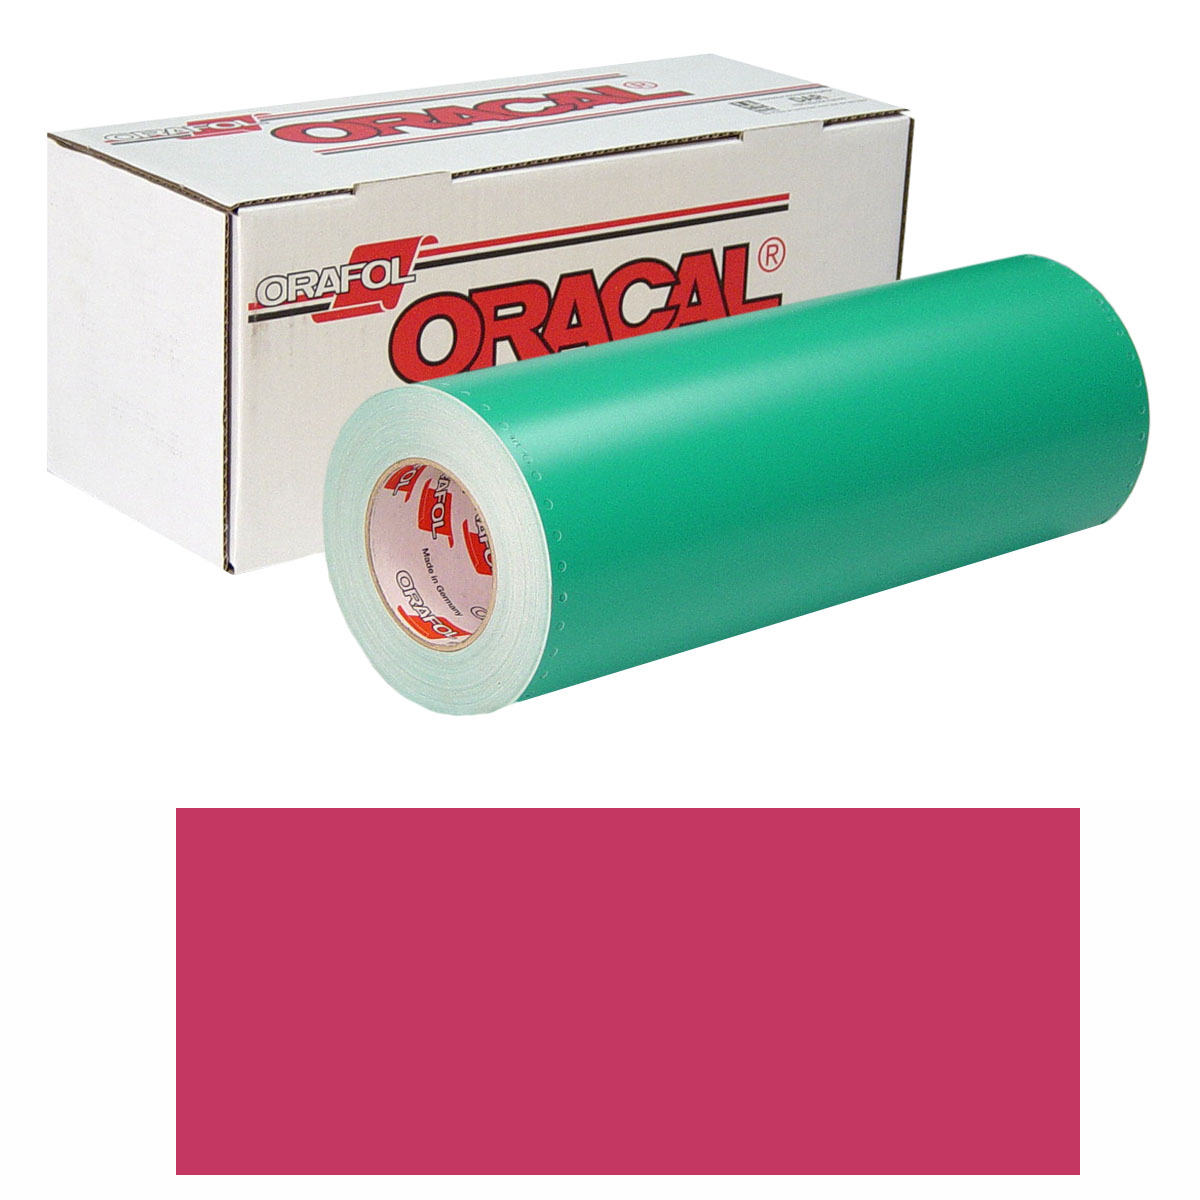 ORACAL 8500 30in X 50yd 031 Red